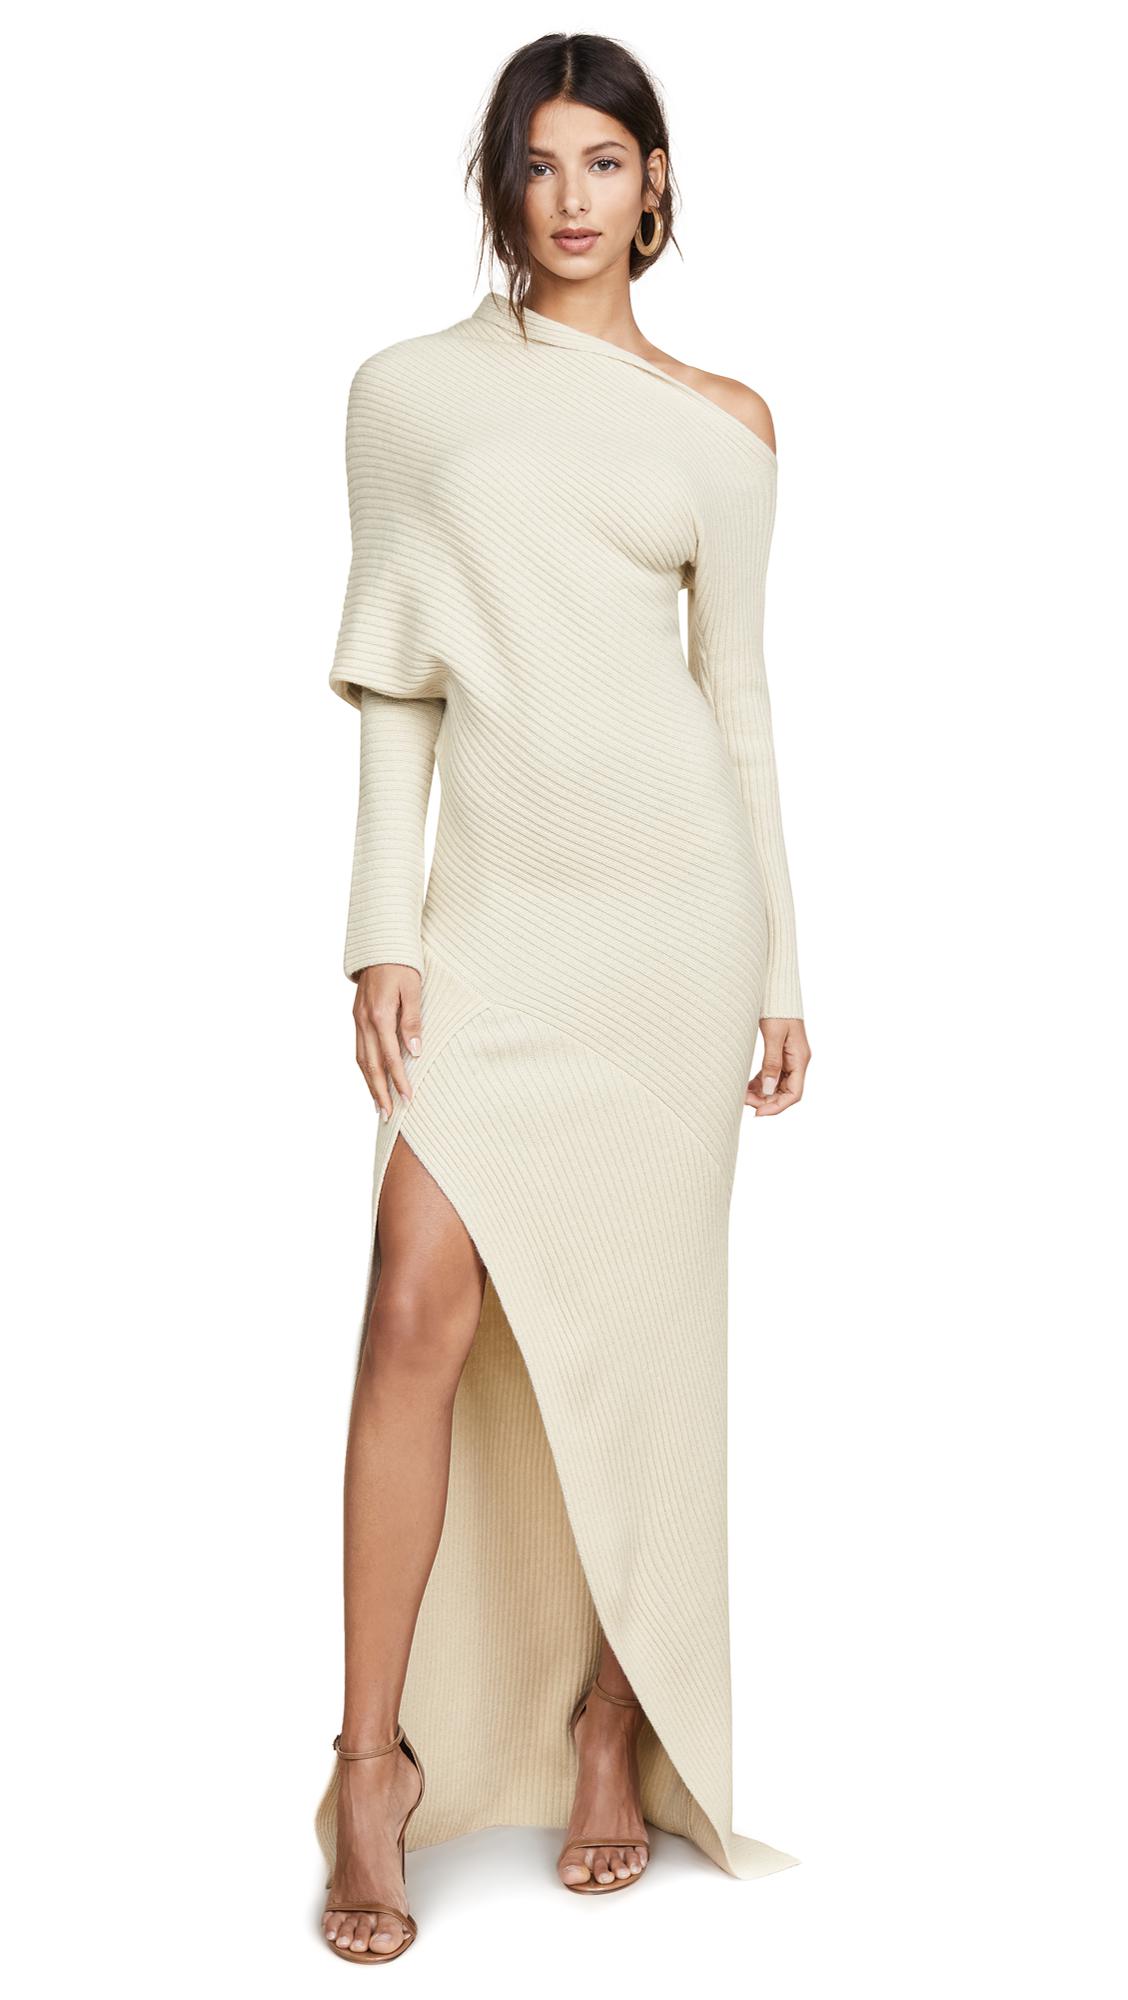 Roberto Cavalli One Shoulder Long Sleeve Knit Dress in Natural - Lyst